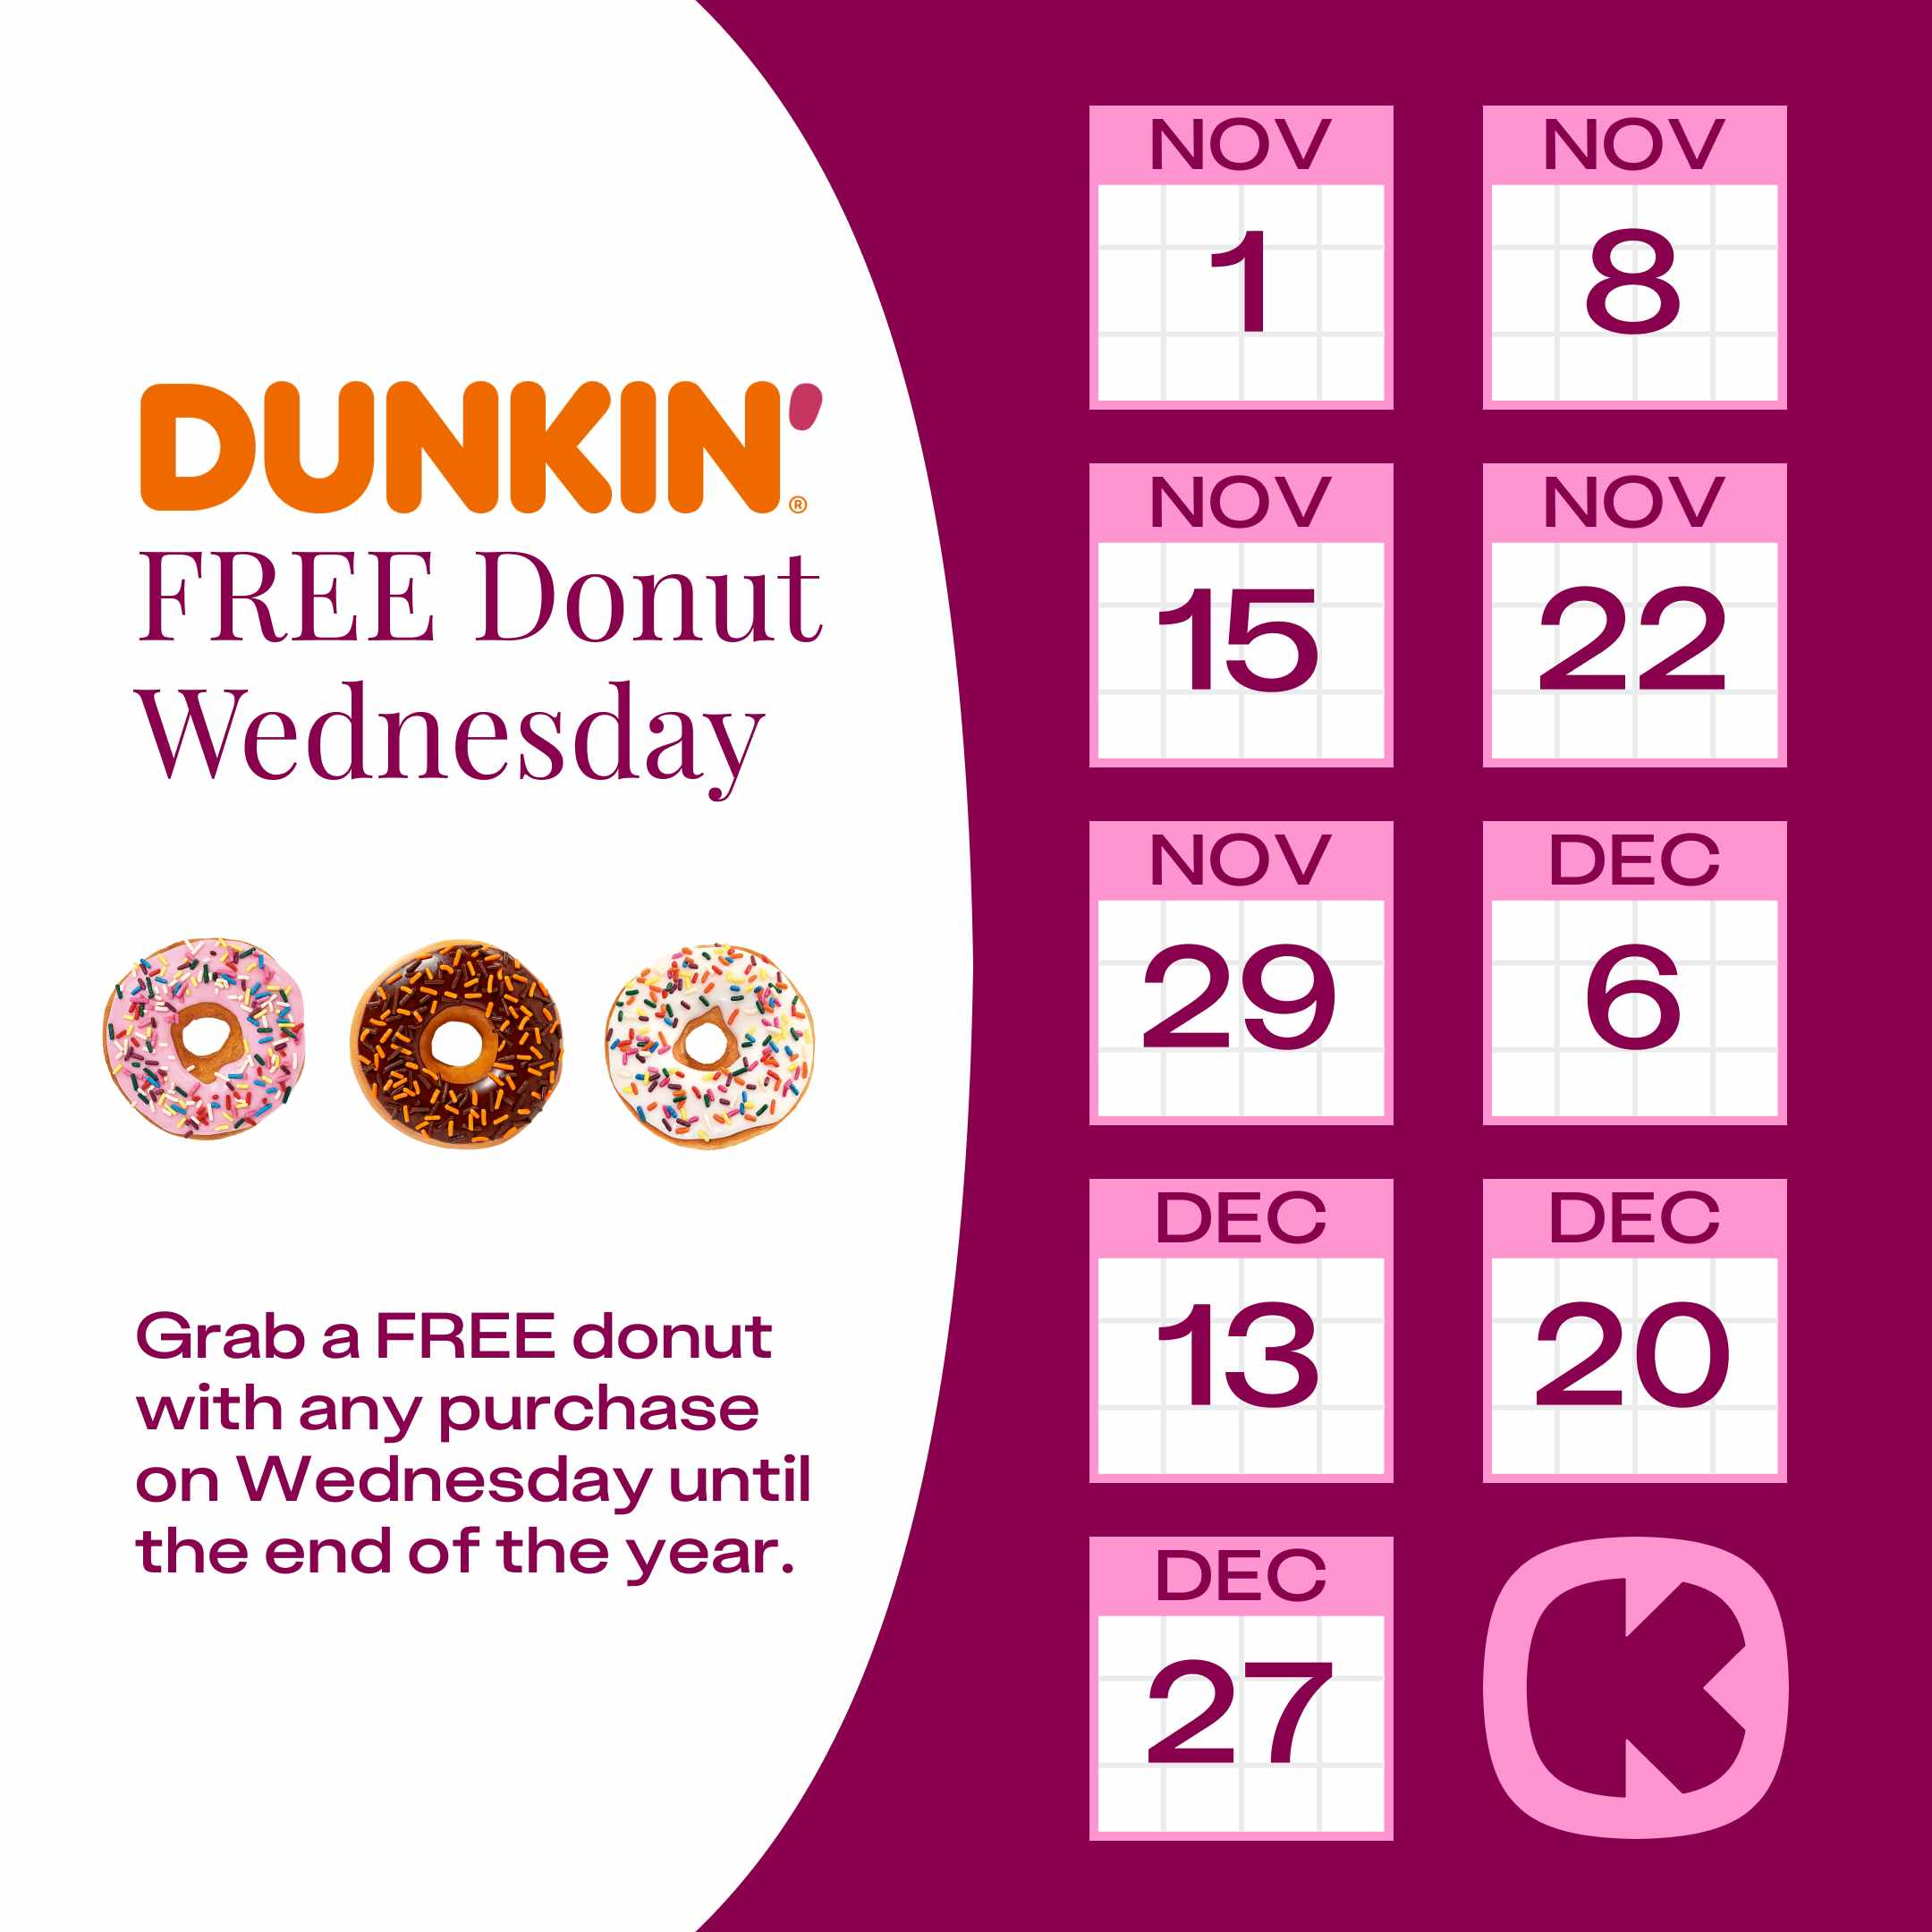 graphic showing wednesdays in november 2023 for dunkin donuts free donut wednesdays